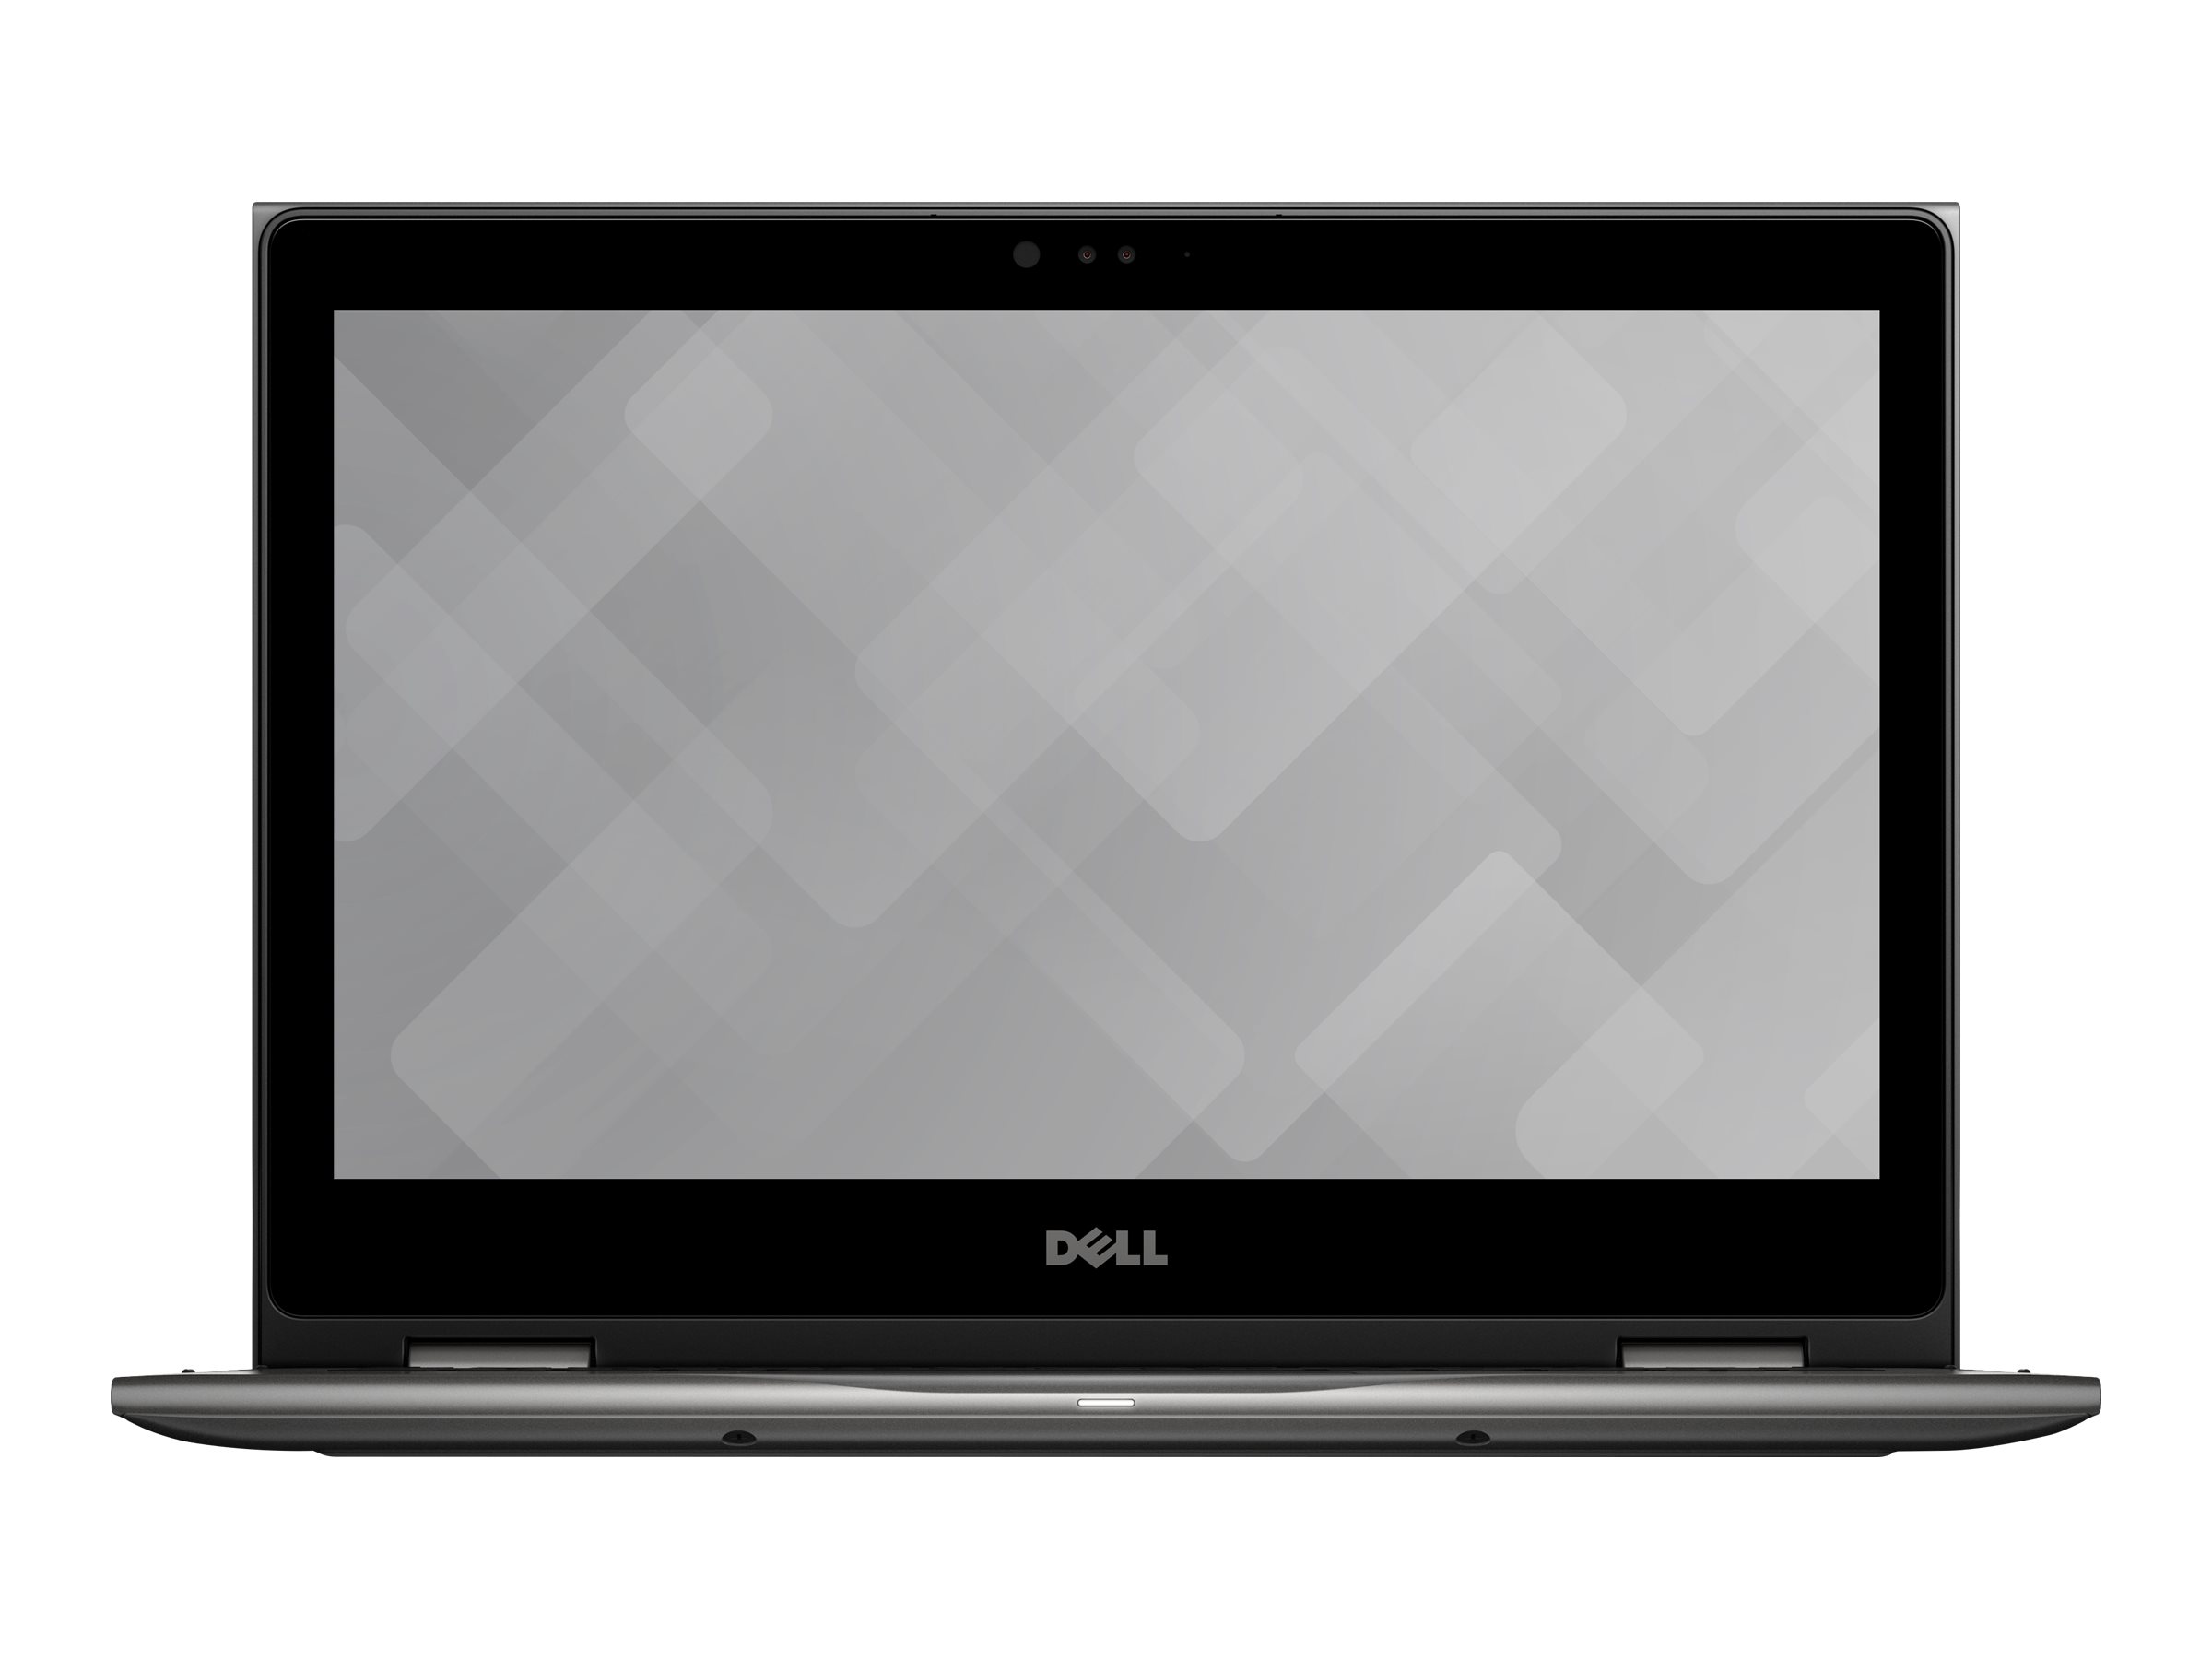 Inspiron 13 5368 2 in 1 Notebook - image 1 of 9